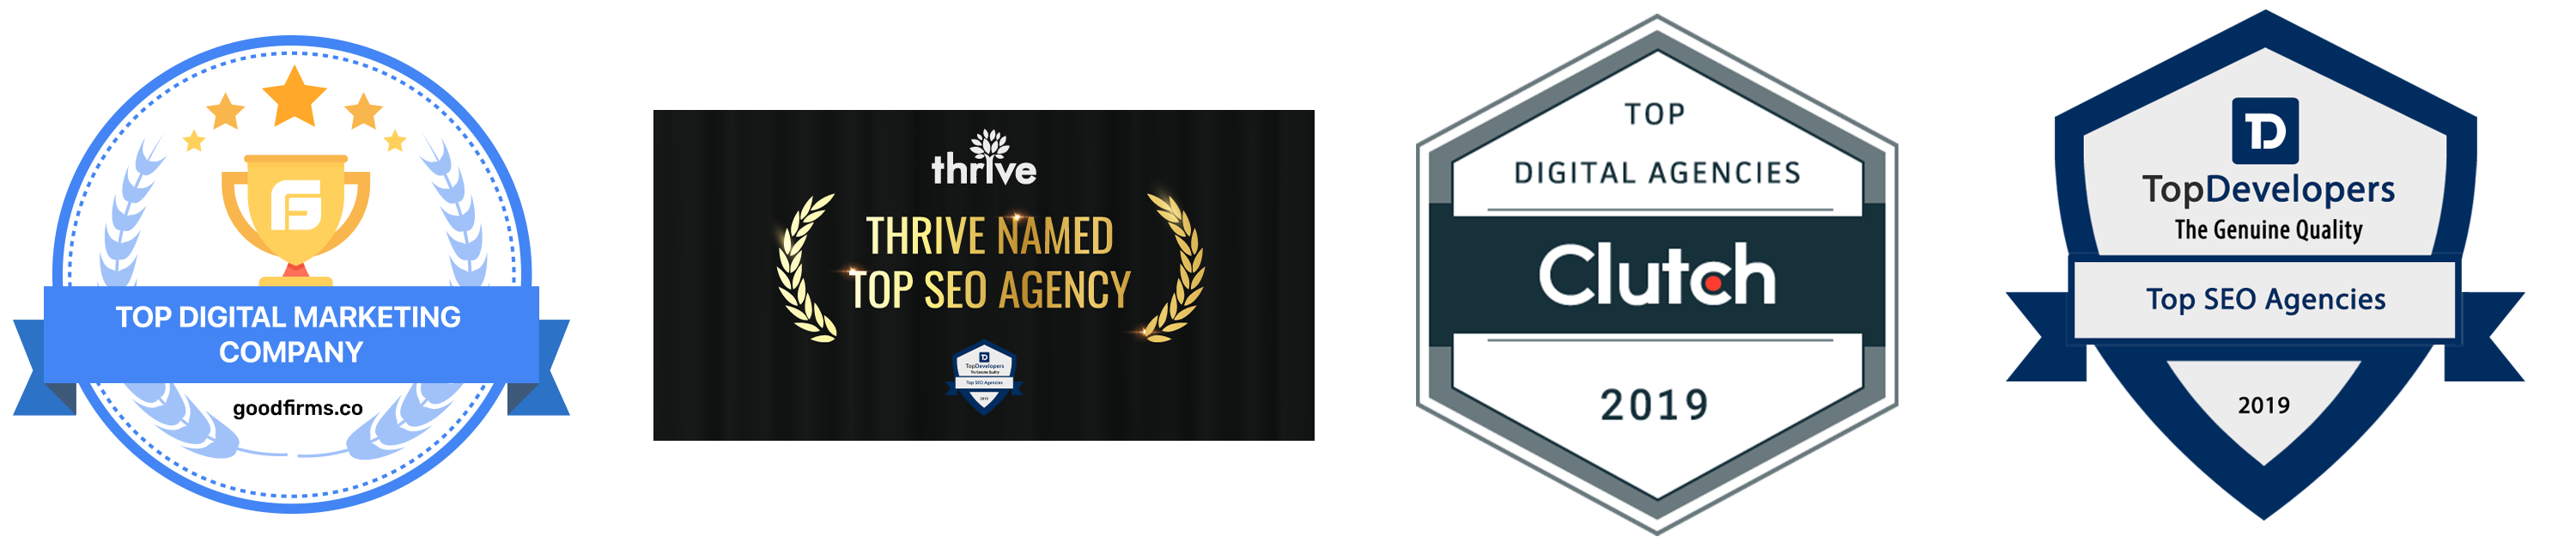 Our Top SEO Company Awards